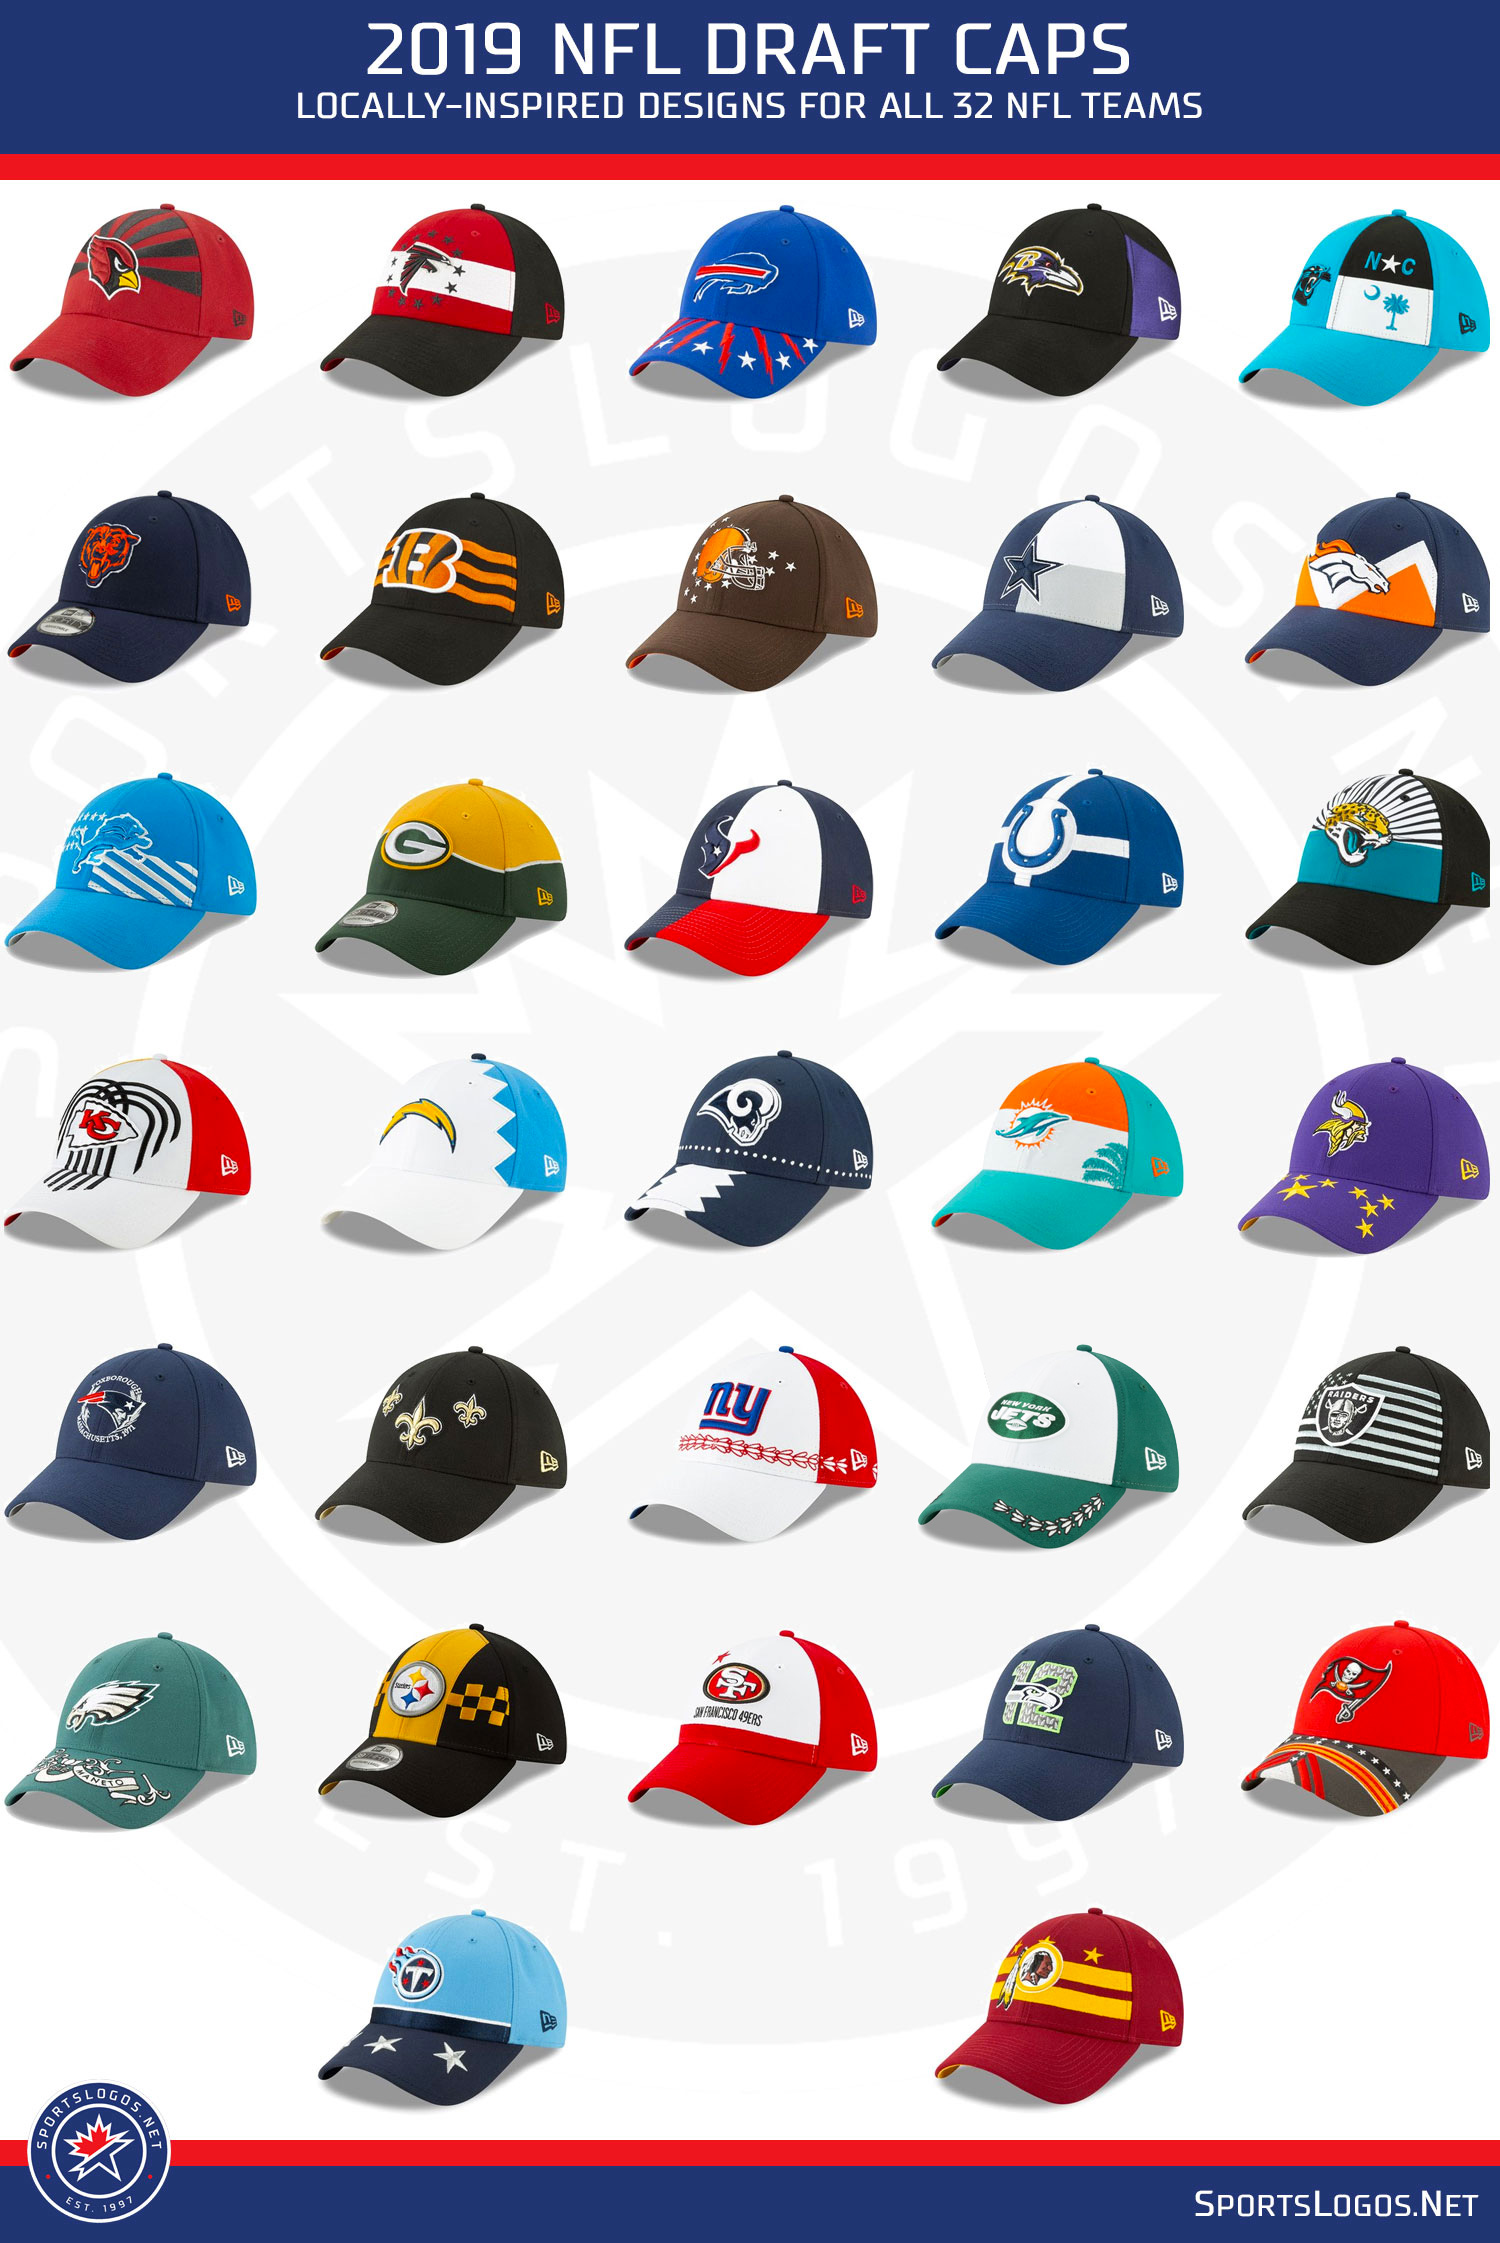 NFL, New Era Release the 2019 NFL Draft Cap Collection SportsLogos